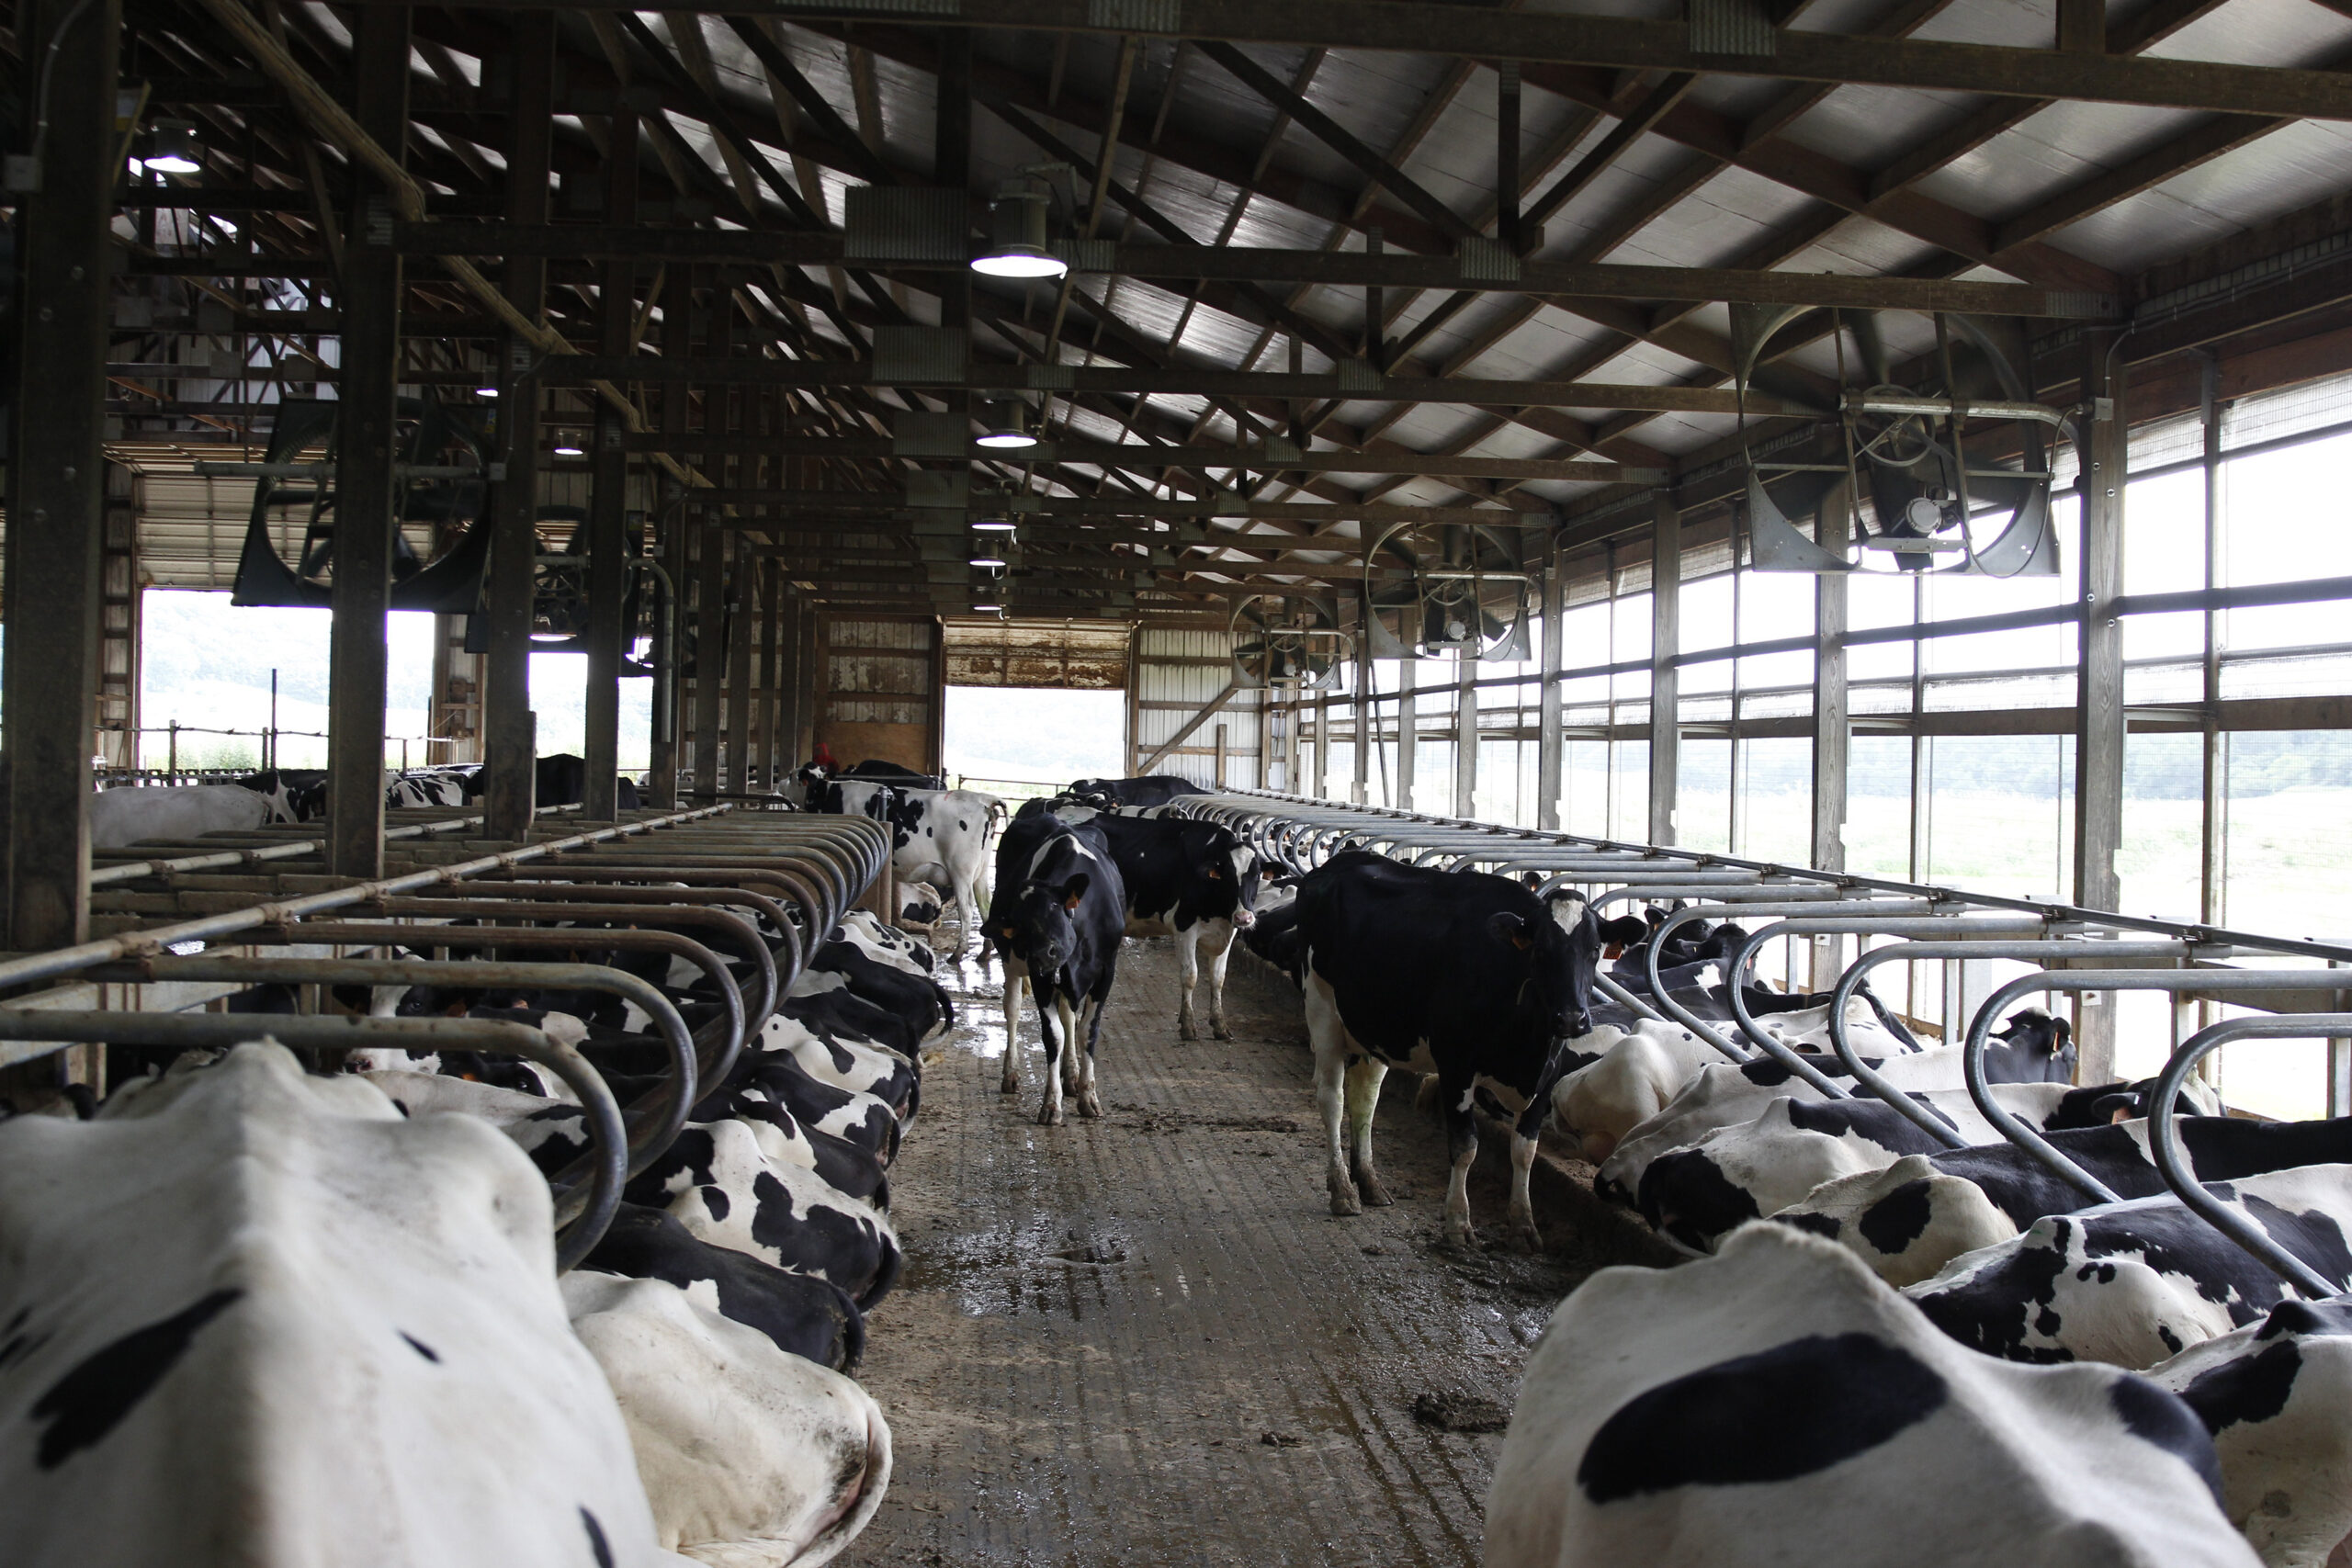 Cows stand in stalls at Mystic Valley Dairy in Sauk City, Wis.